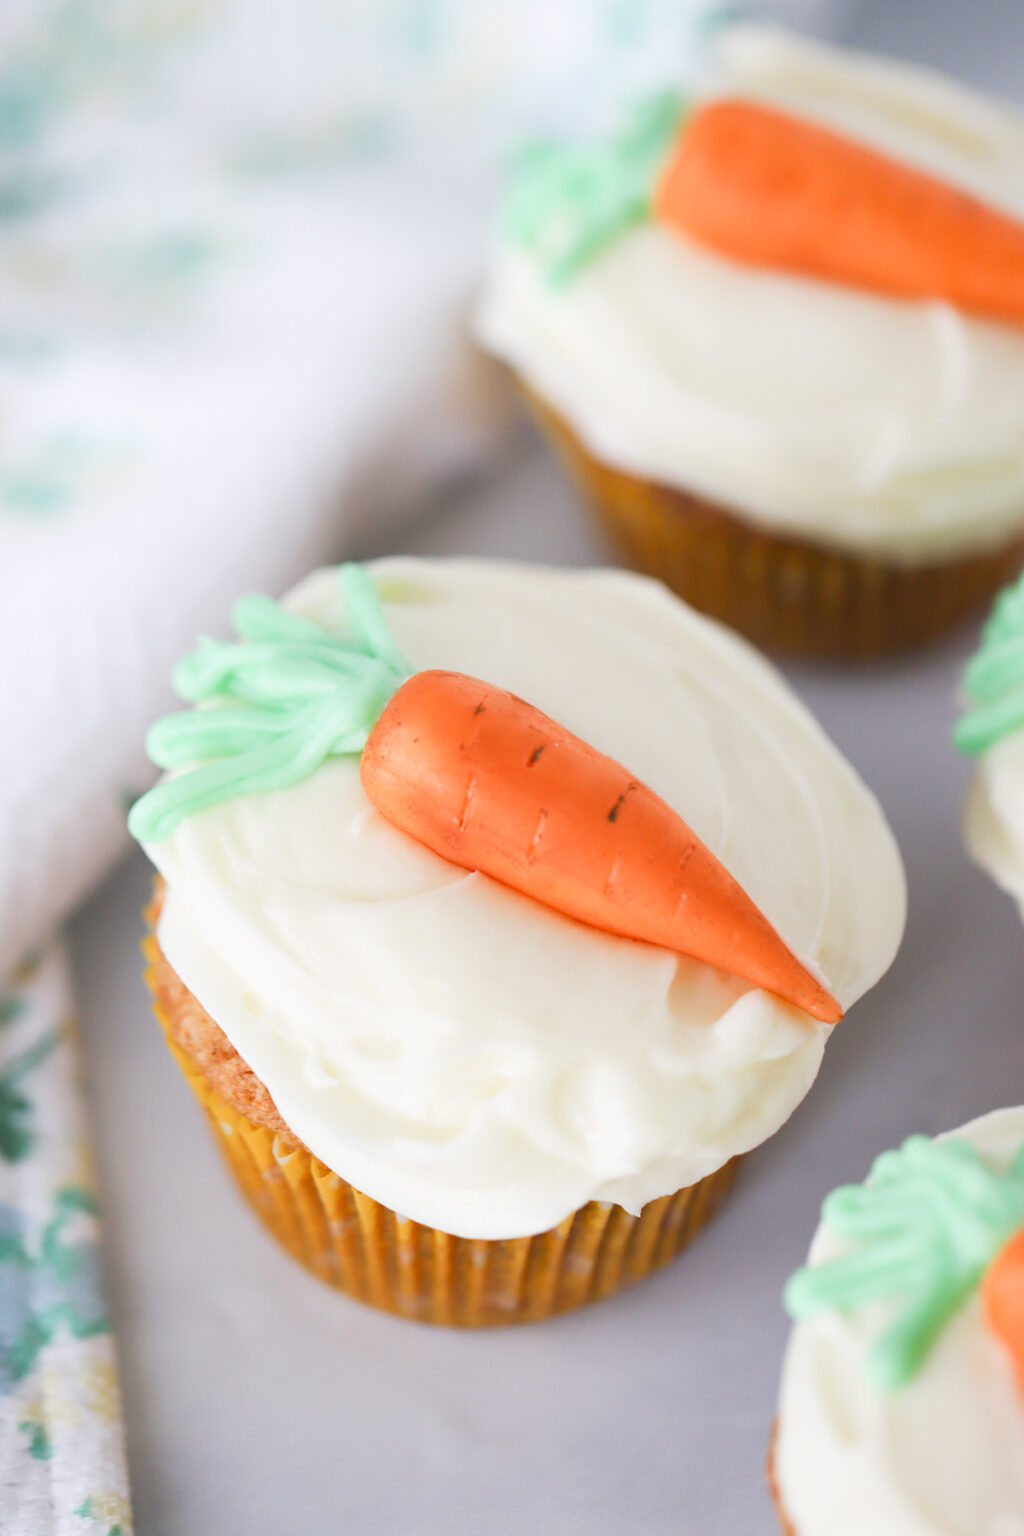 Simple Carrot Cake Cupcakes - The Carefree Kitchen